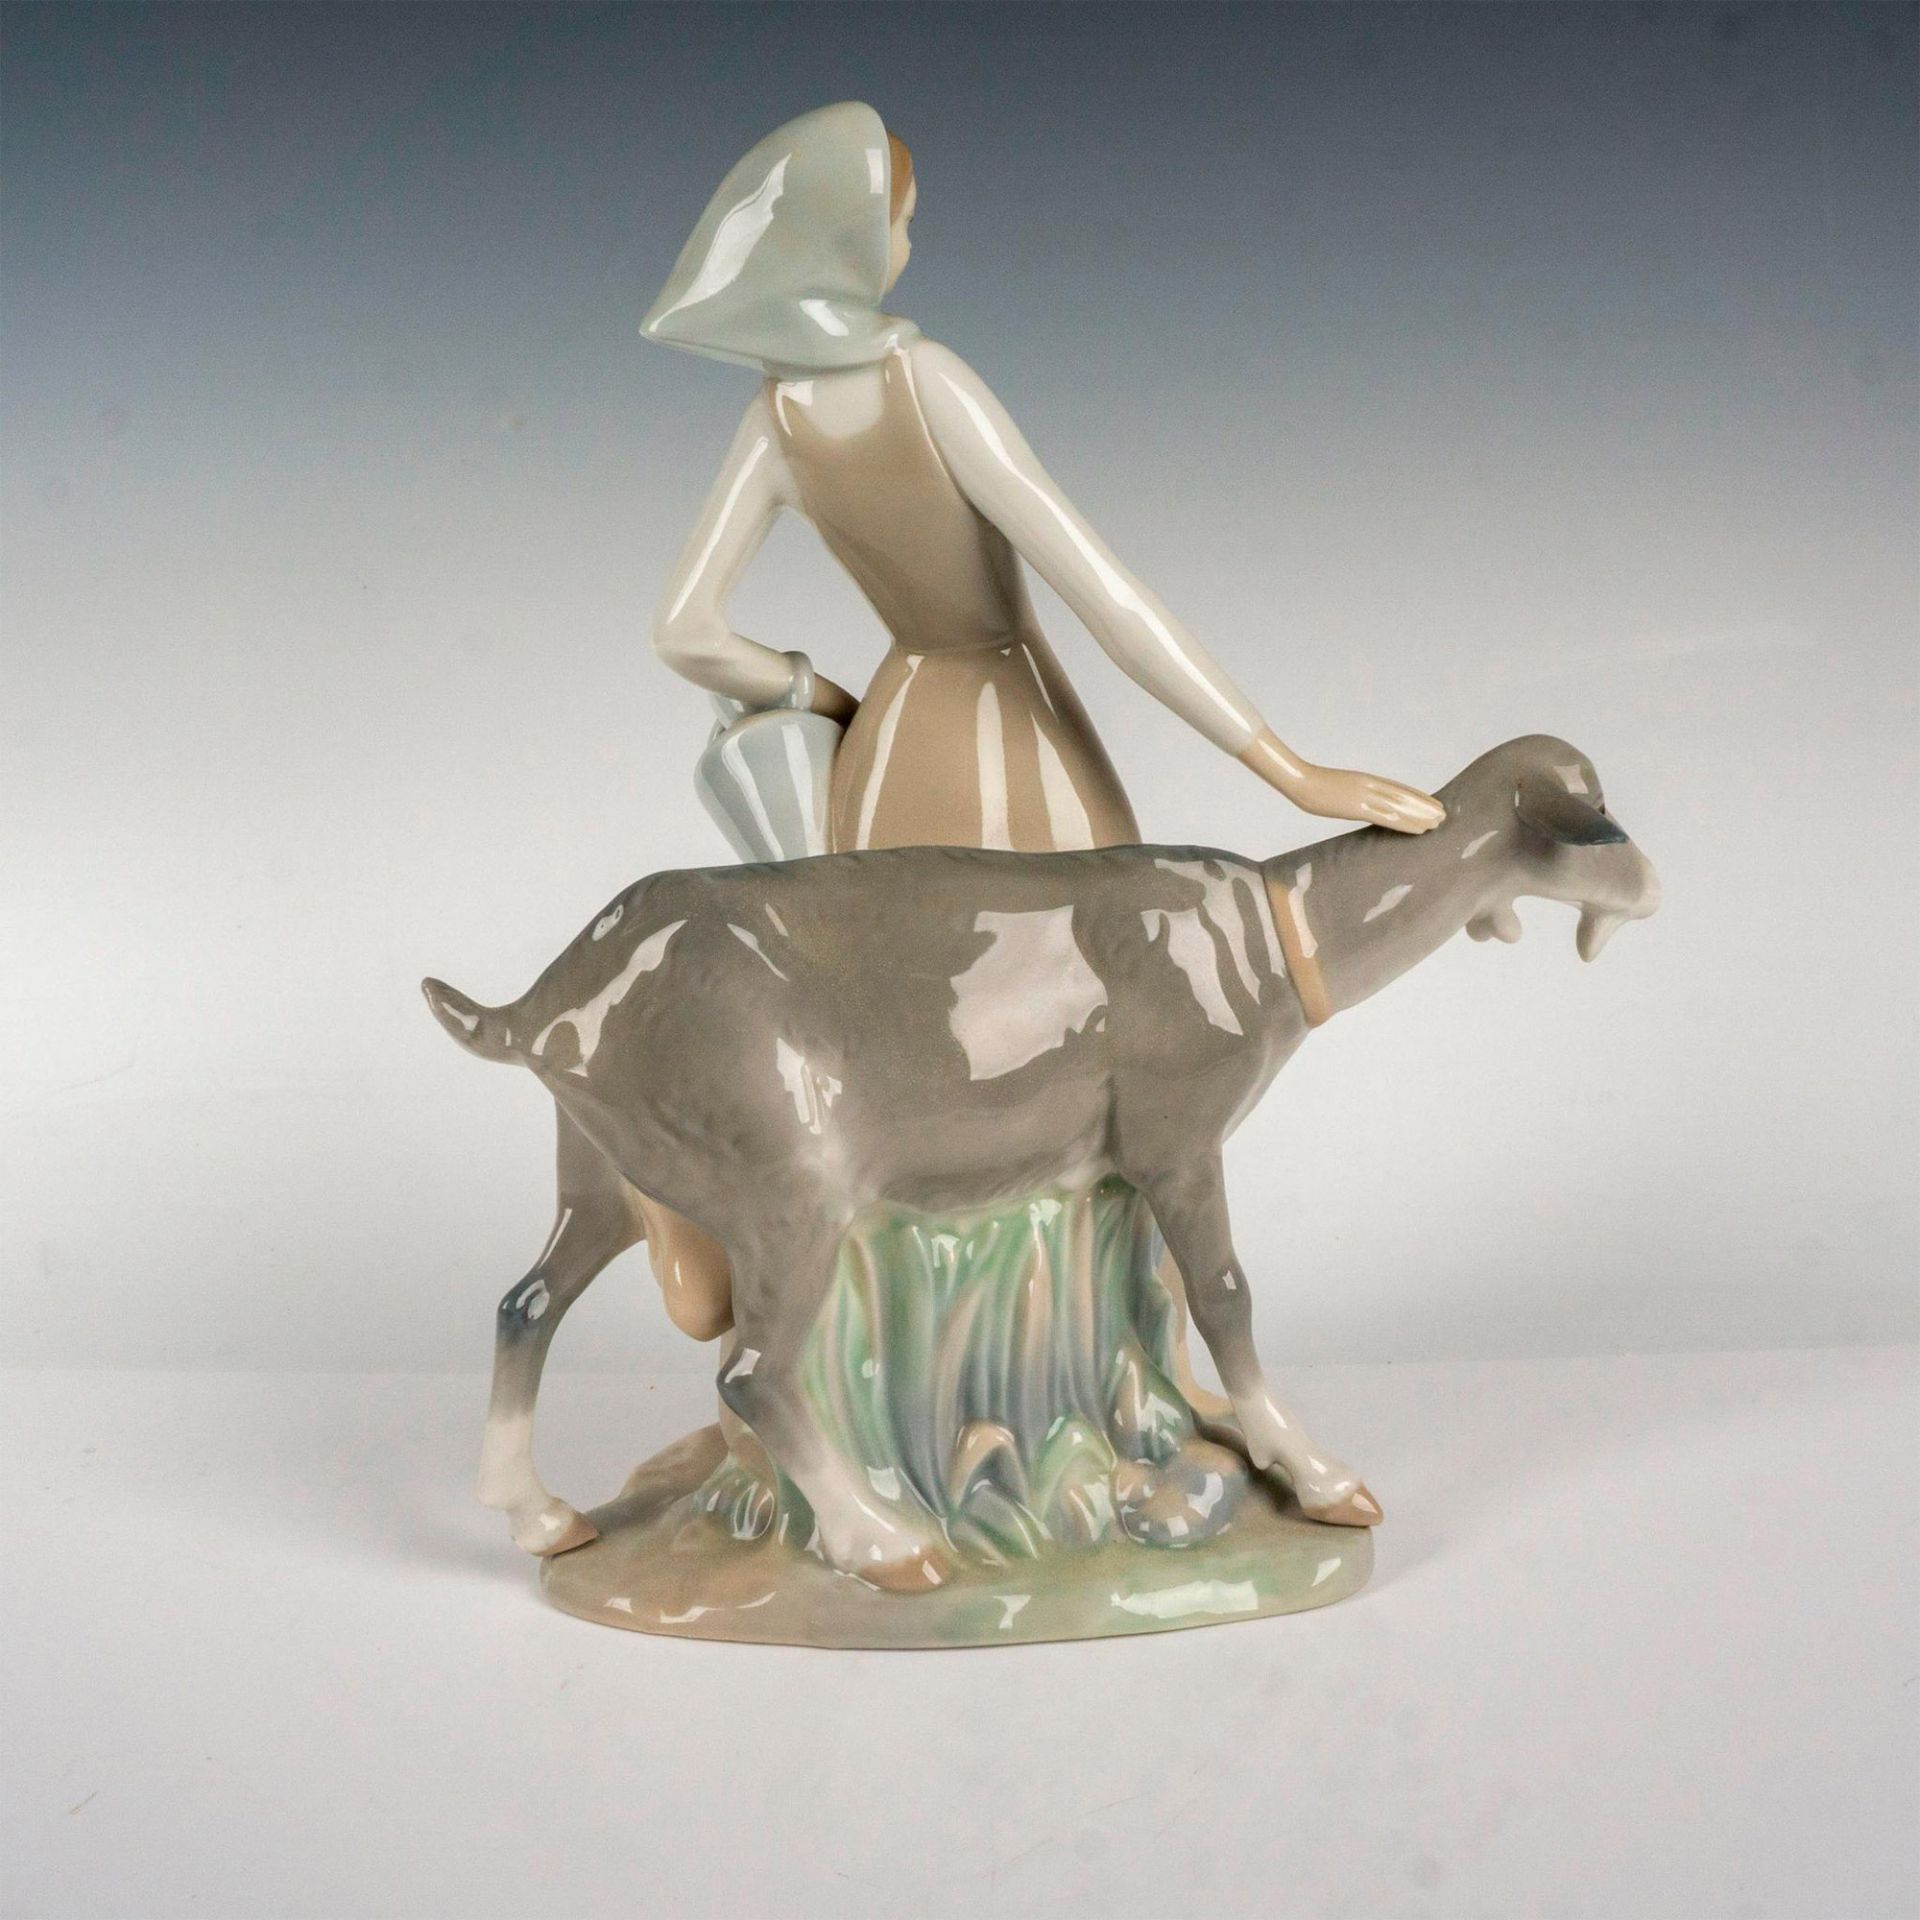 Girl With Pitcher 1004590 - Lladro Porcelain Figurine - Image 2 of 3